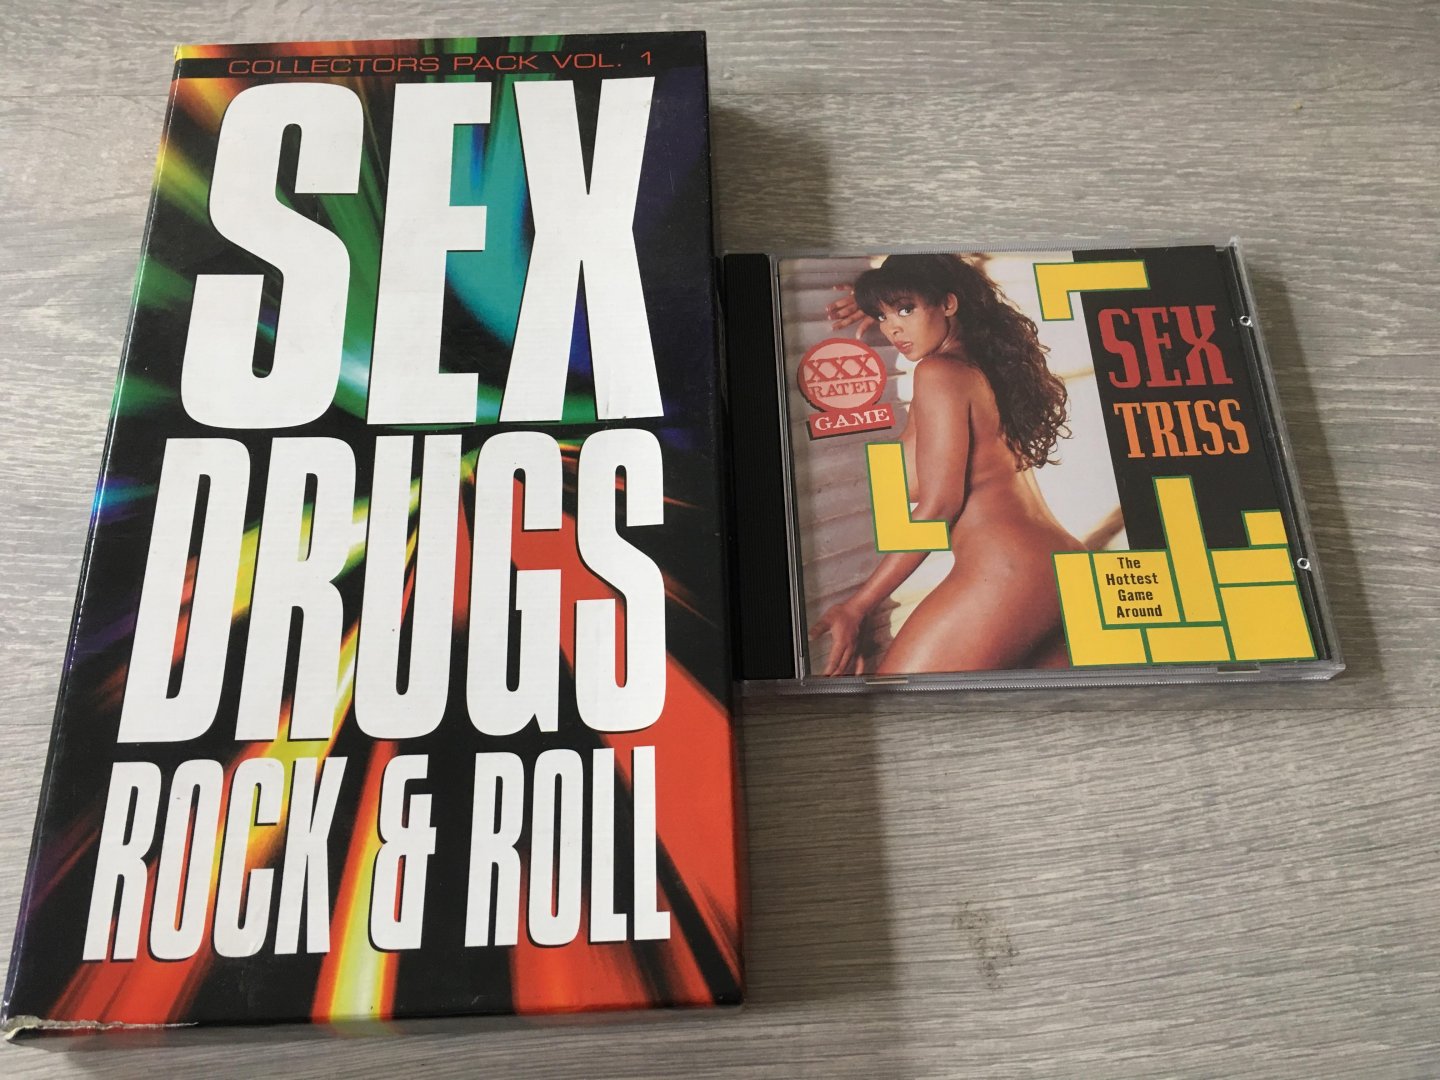  - Collectors pack volume 1; The Amsterdam marihuana guide, Sex drugs rock & roll